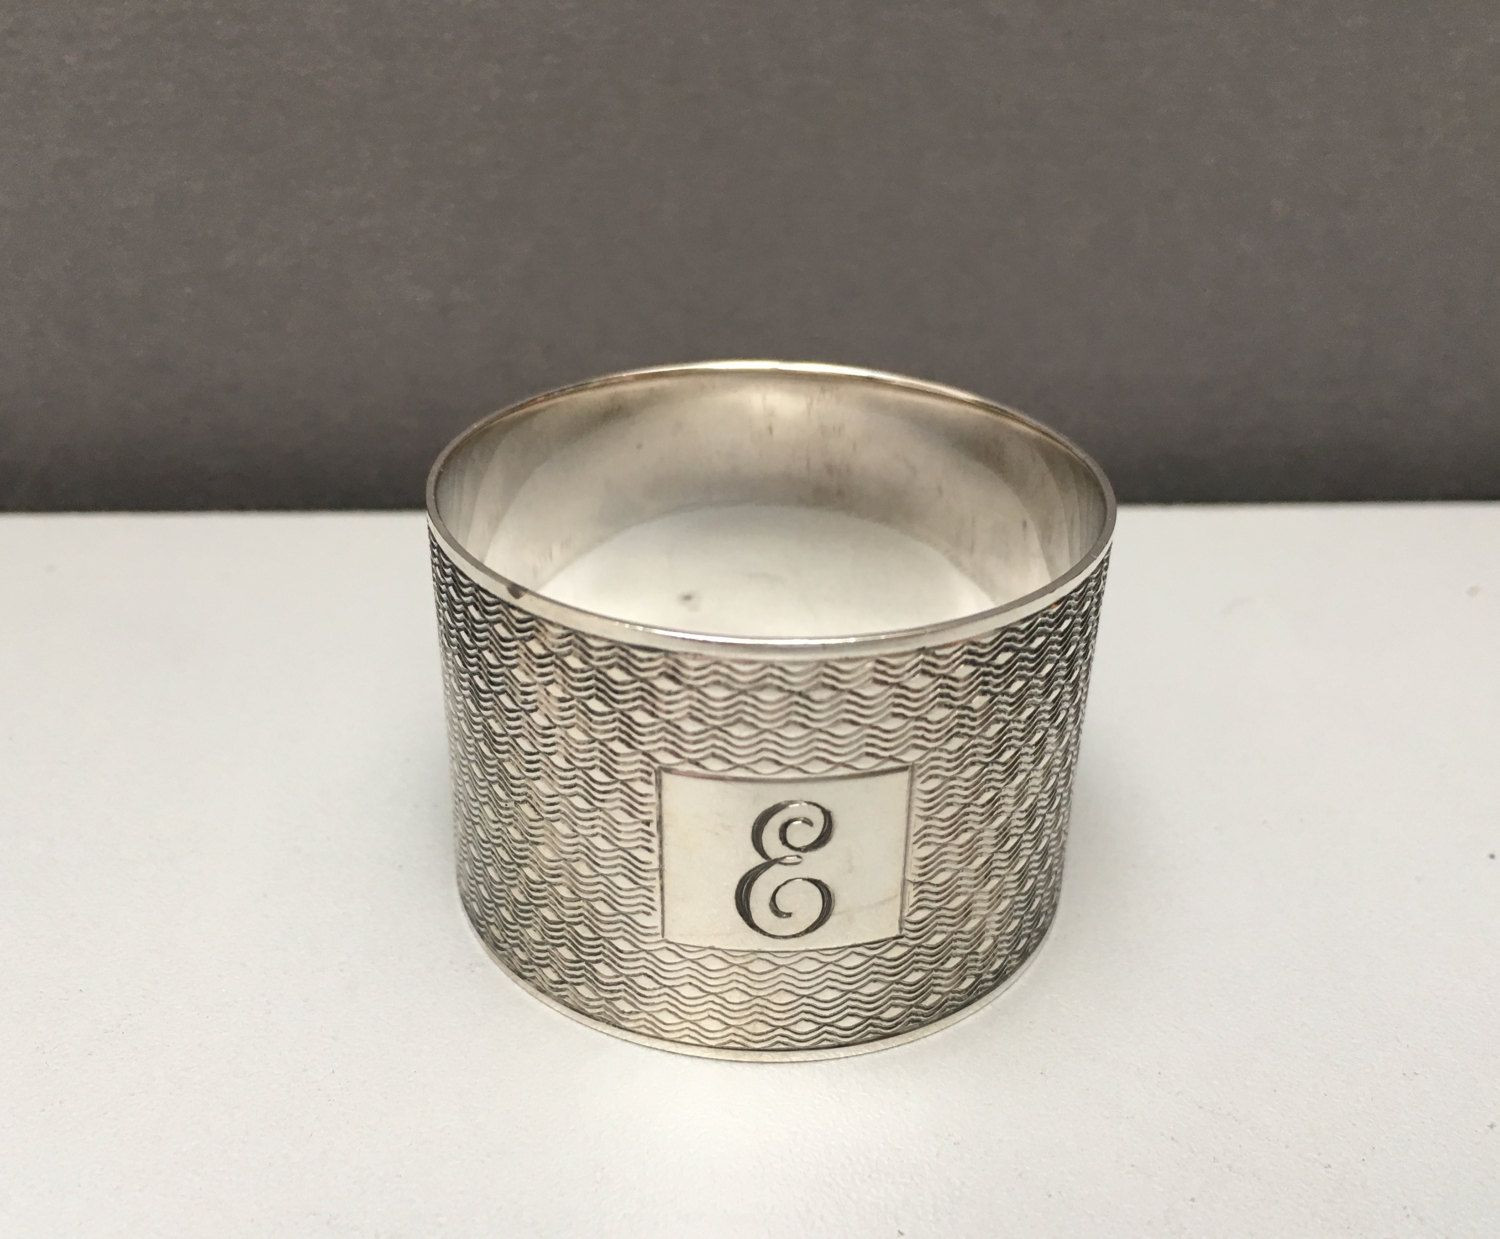 30 attractive Sterling Silver Vase Engraved 2024 free download sterling silver vase engraved of sterling silver hallmarked napkin ring viners engraved engine turned regarding sterling silver hallmarked napkin ring viners engraved engine turned letter e 